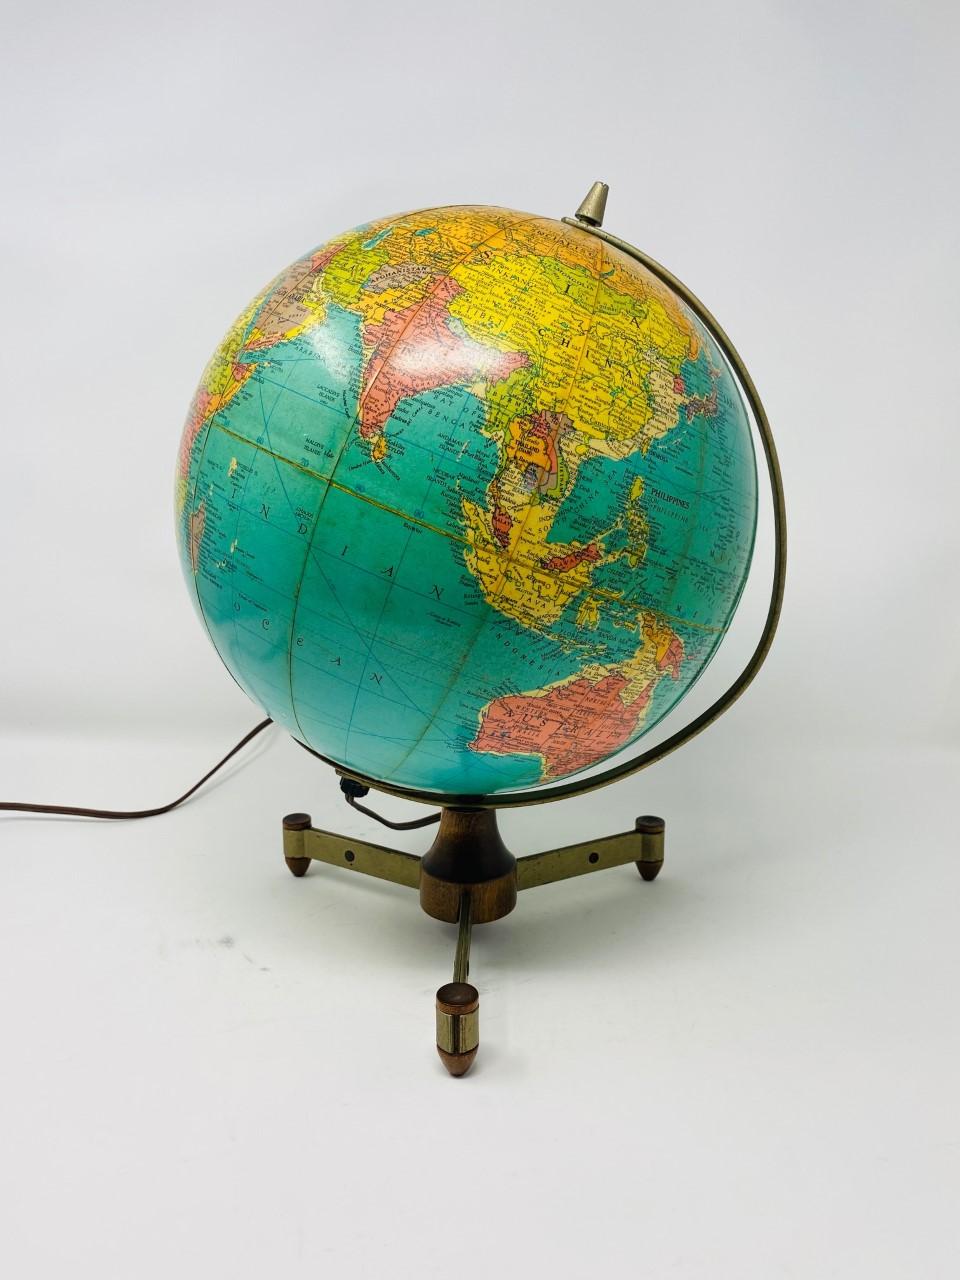 Midcentury fiberglass and wood earth globe lamp with wood and metal base by Reploge Globes Inc. Chicago.  Incredibly mod piece that stands on a metal and wood base with 3 feet.  The feet are molded teak that attach to metal legs that meet into a